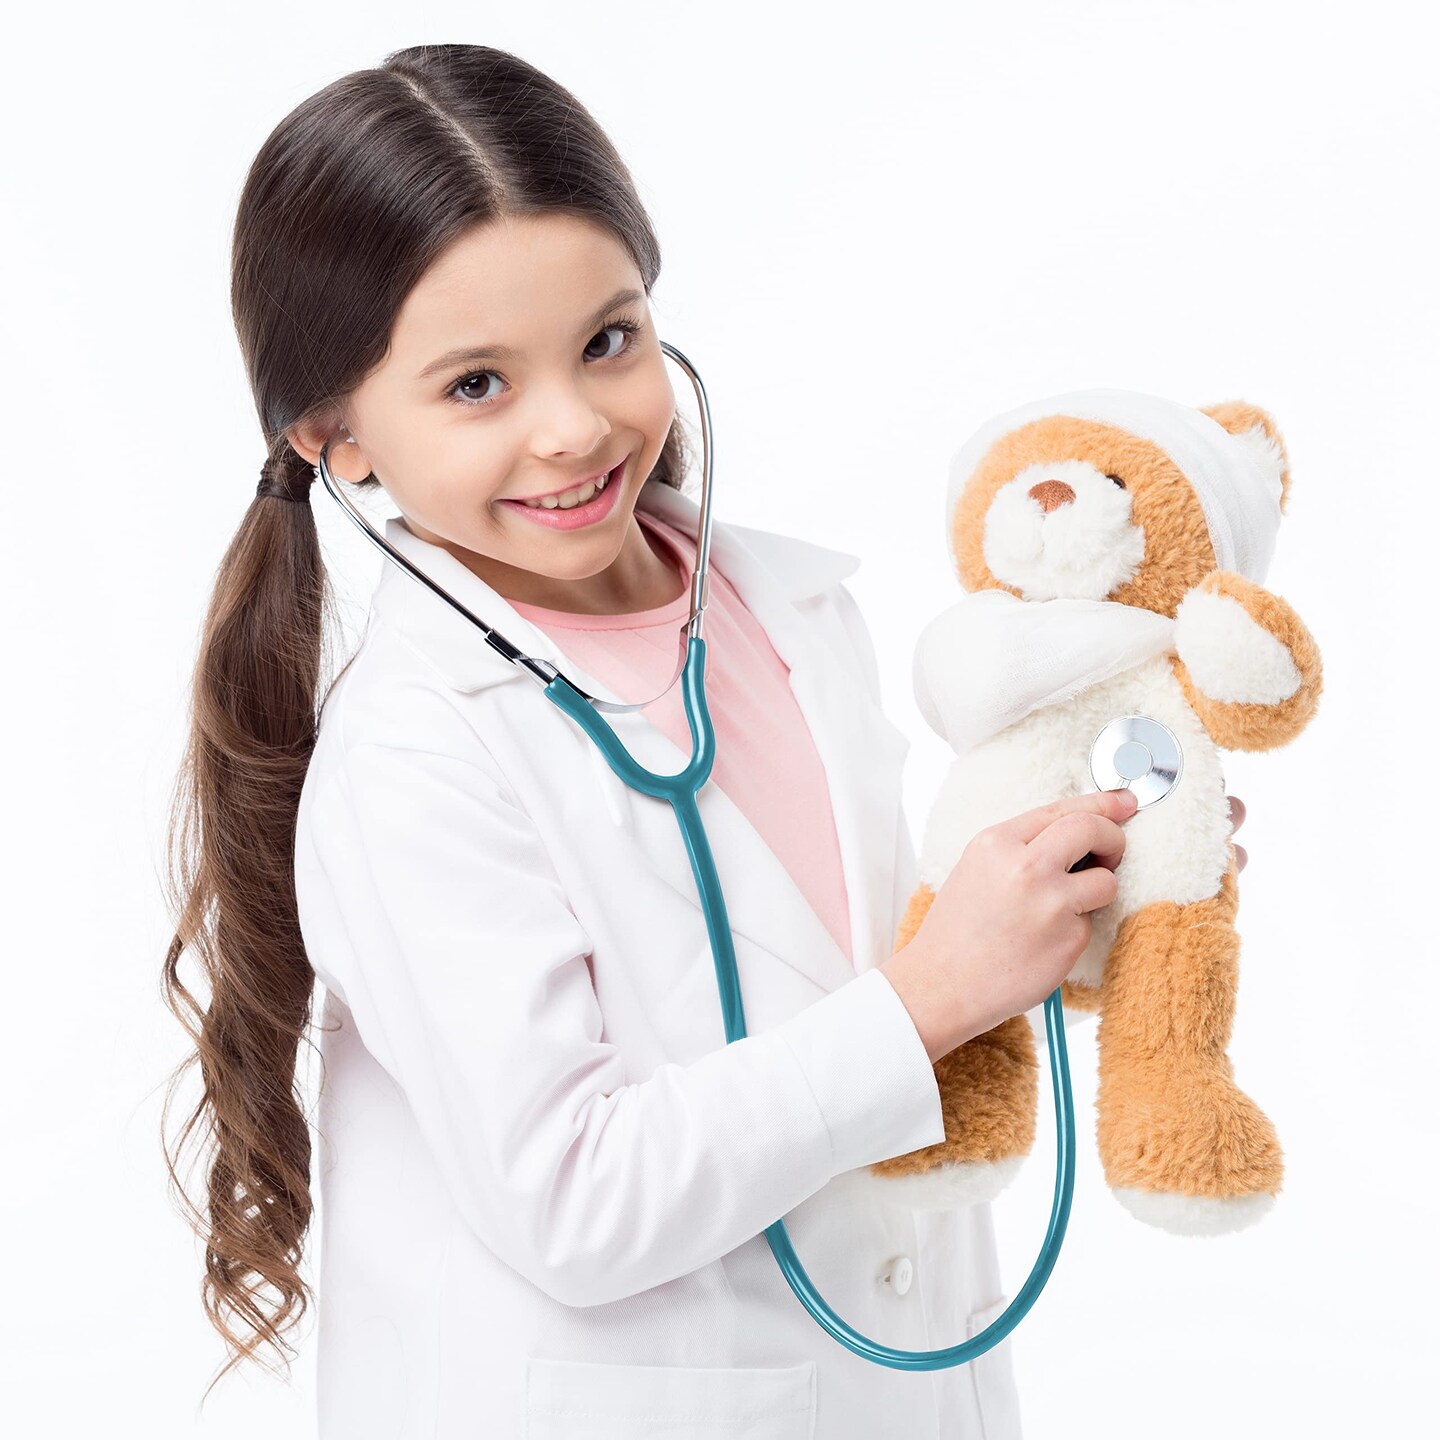 Blue Doctor&#x27;s Stethoscope Toy - Doctor Or Nurse Pretend Play Costume Accessories and Prop Toys for Kids - 1 Piece